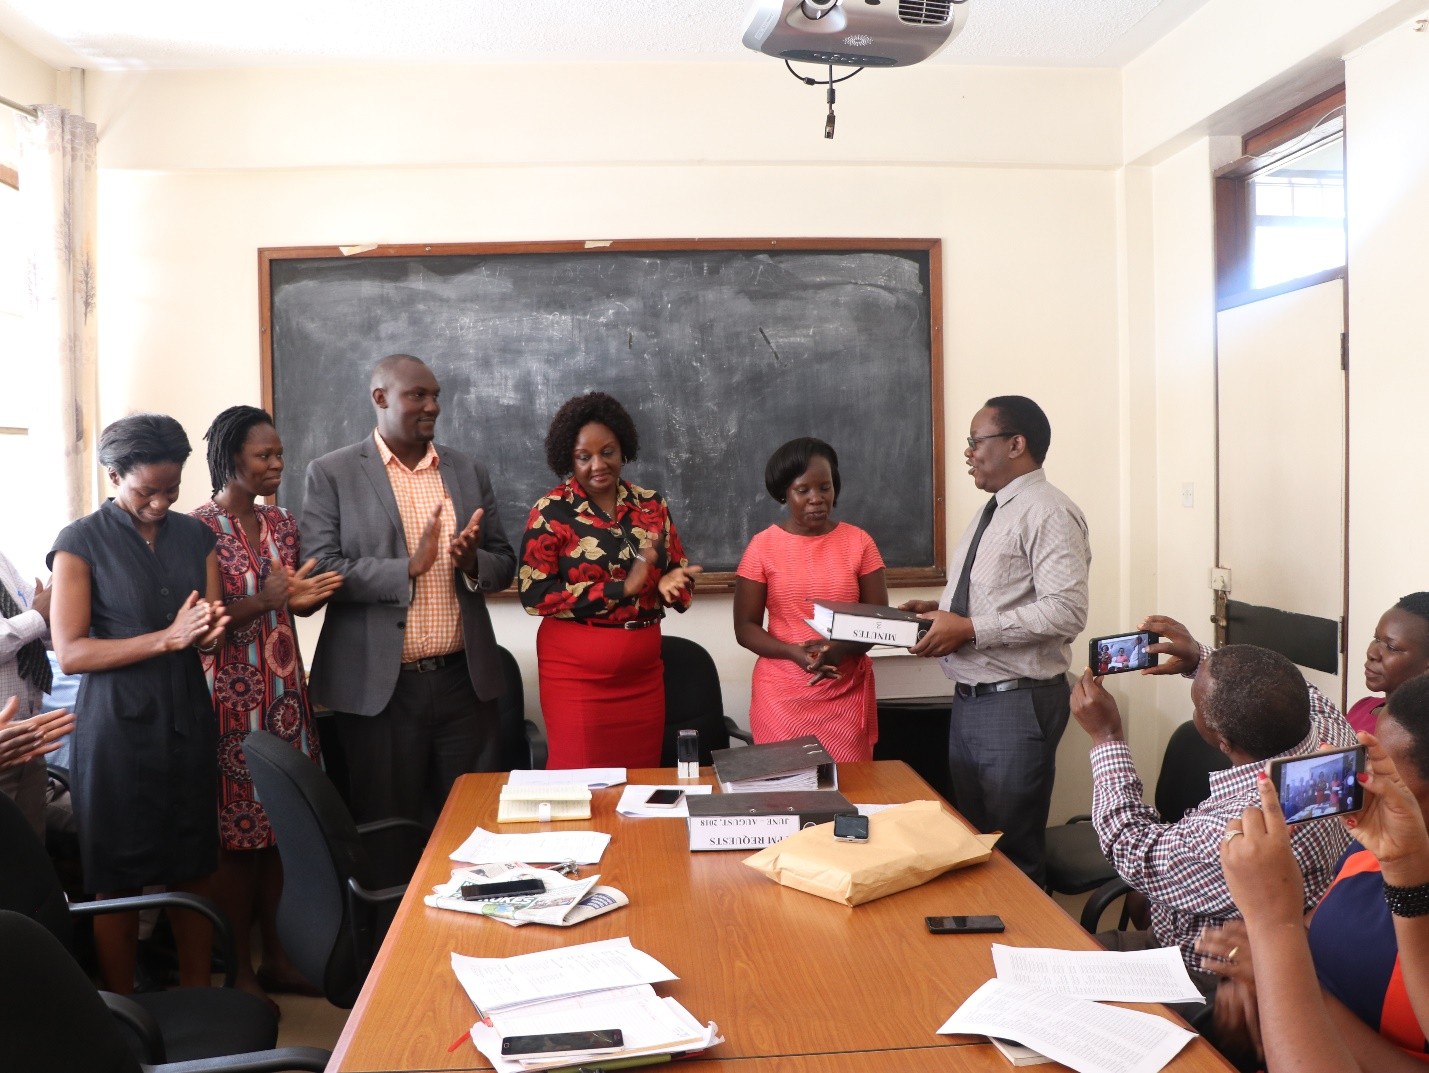 Pictured Below: Outgoing Chair, Prof Freddie Ssengooba (extreme right) hands over a file to the new Chair, Dr Elizabeth Ekirapa (next right). Looking on is the Dean (in floral top and red skirt), Mr Amos Dembe, the internal auditorr and University representative, Dr Jane Mutyoba, and Dr Esther Buregyeya, the Chair of Disease Control and Environmental Health